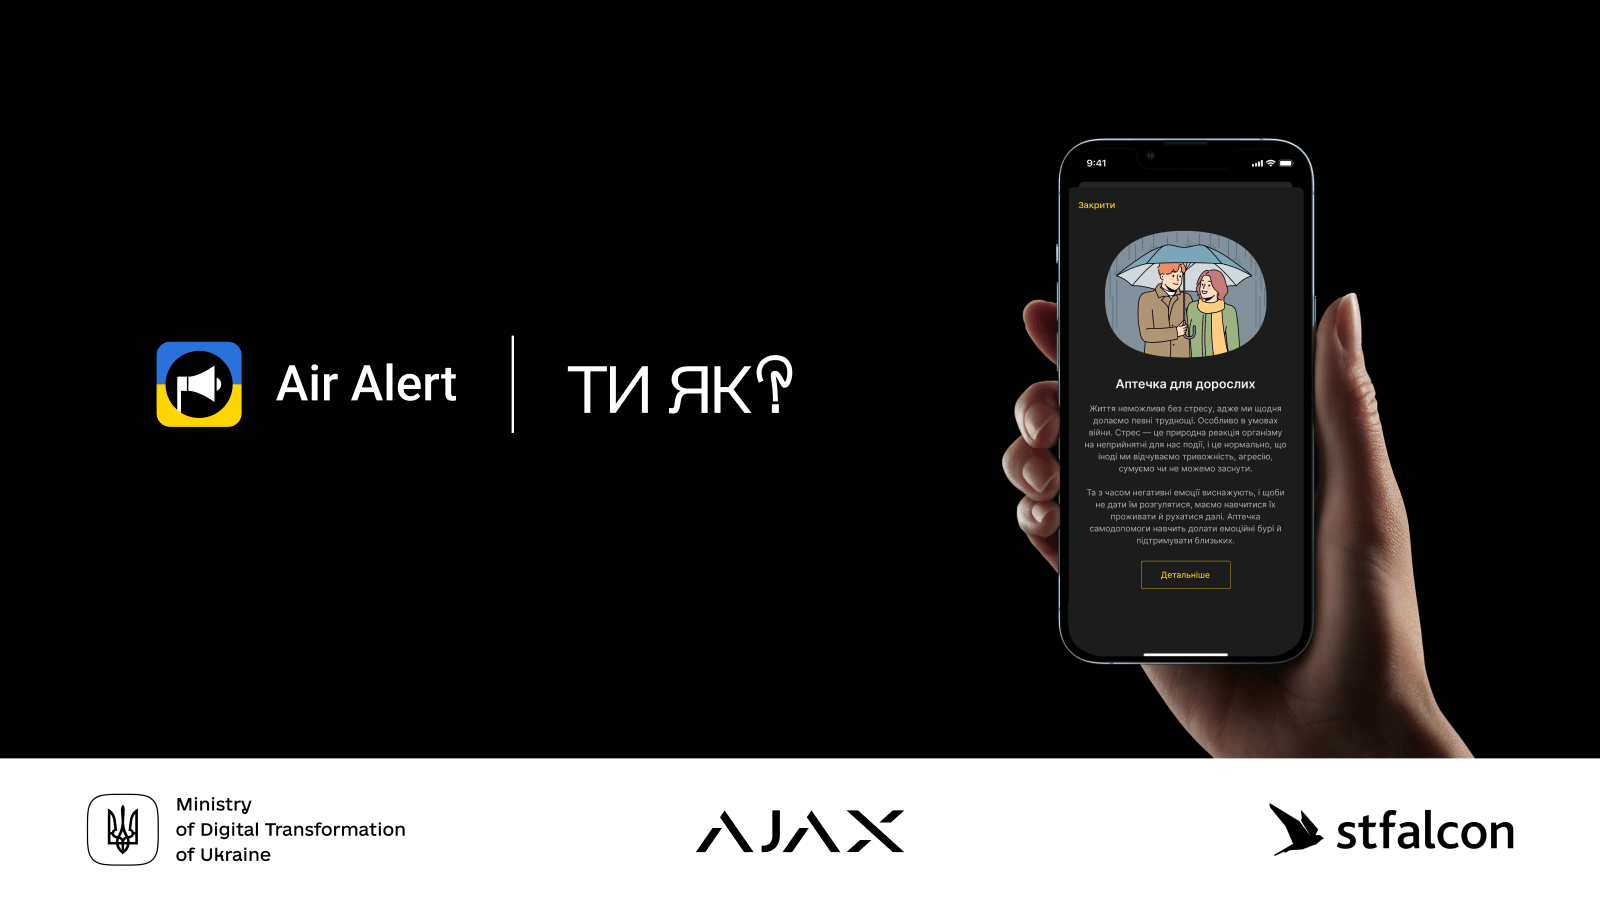 The Air Alert app features self-help techniques from the Ukrainian program “How Are You?”